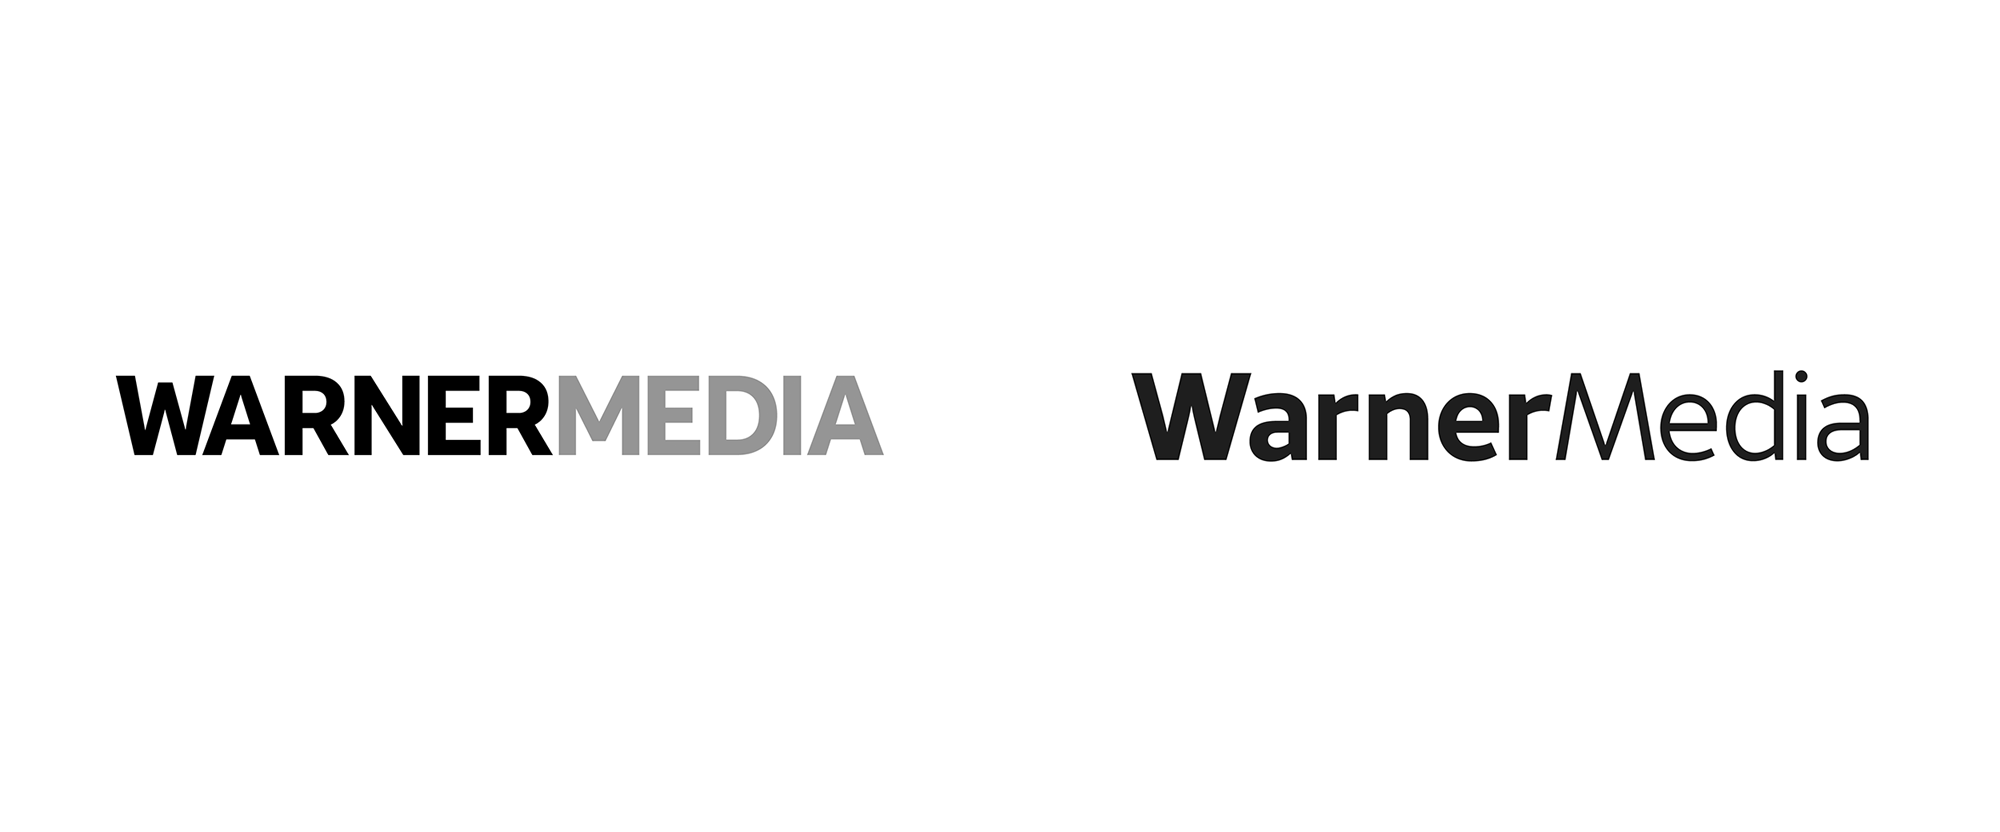 New Logo and Identity for WarnerMedia by Wolff Olins